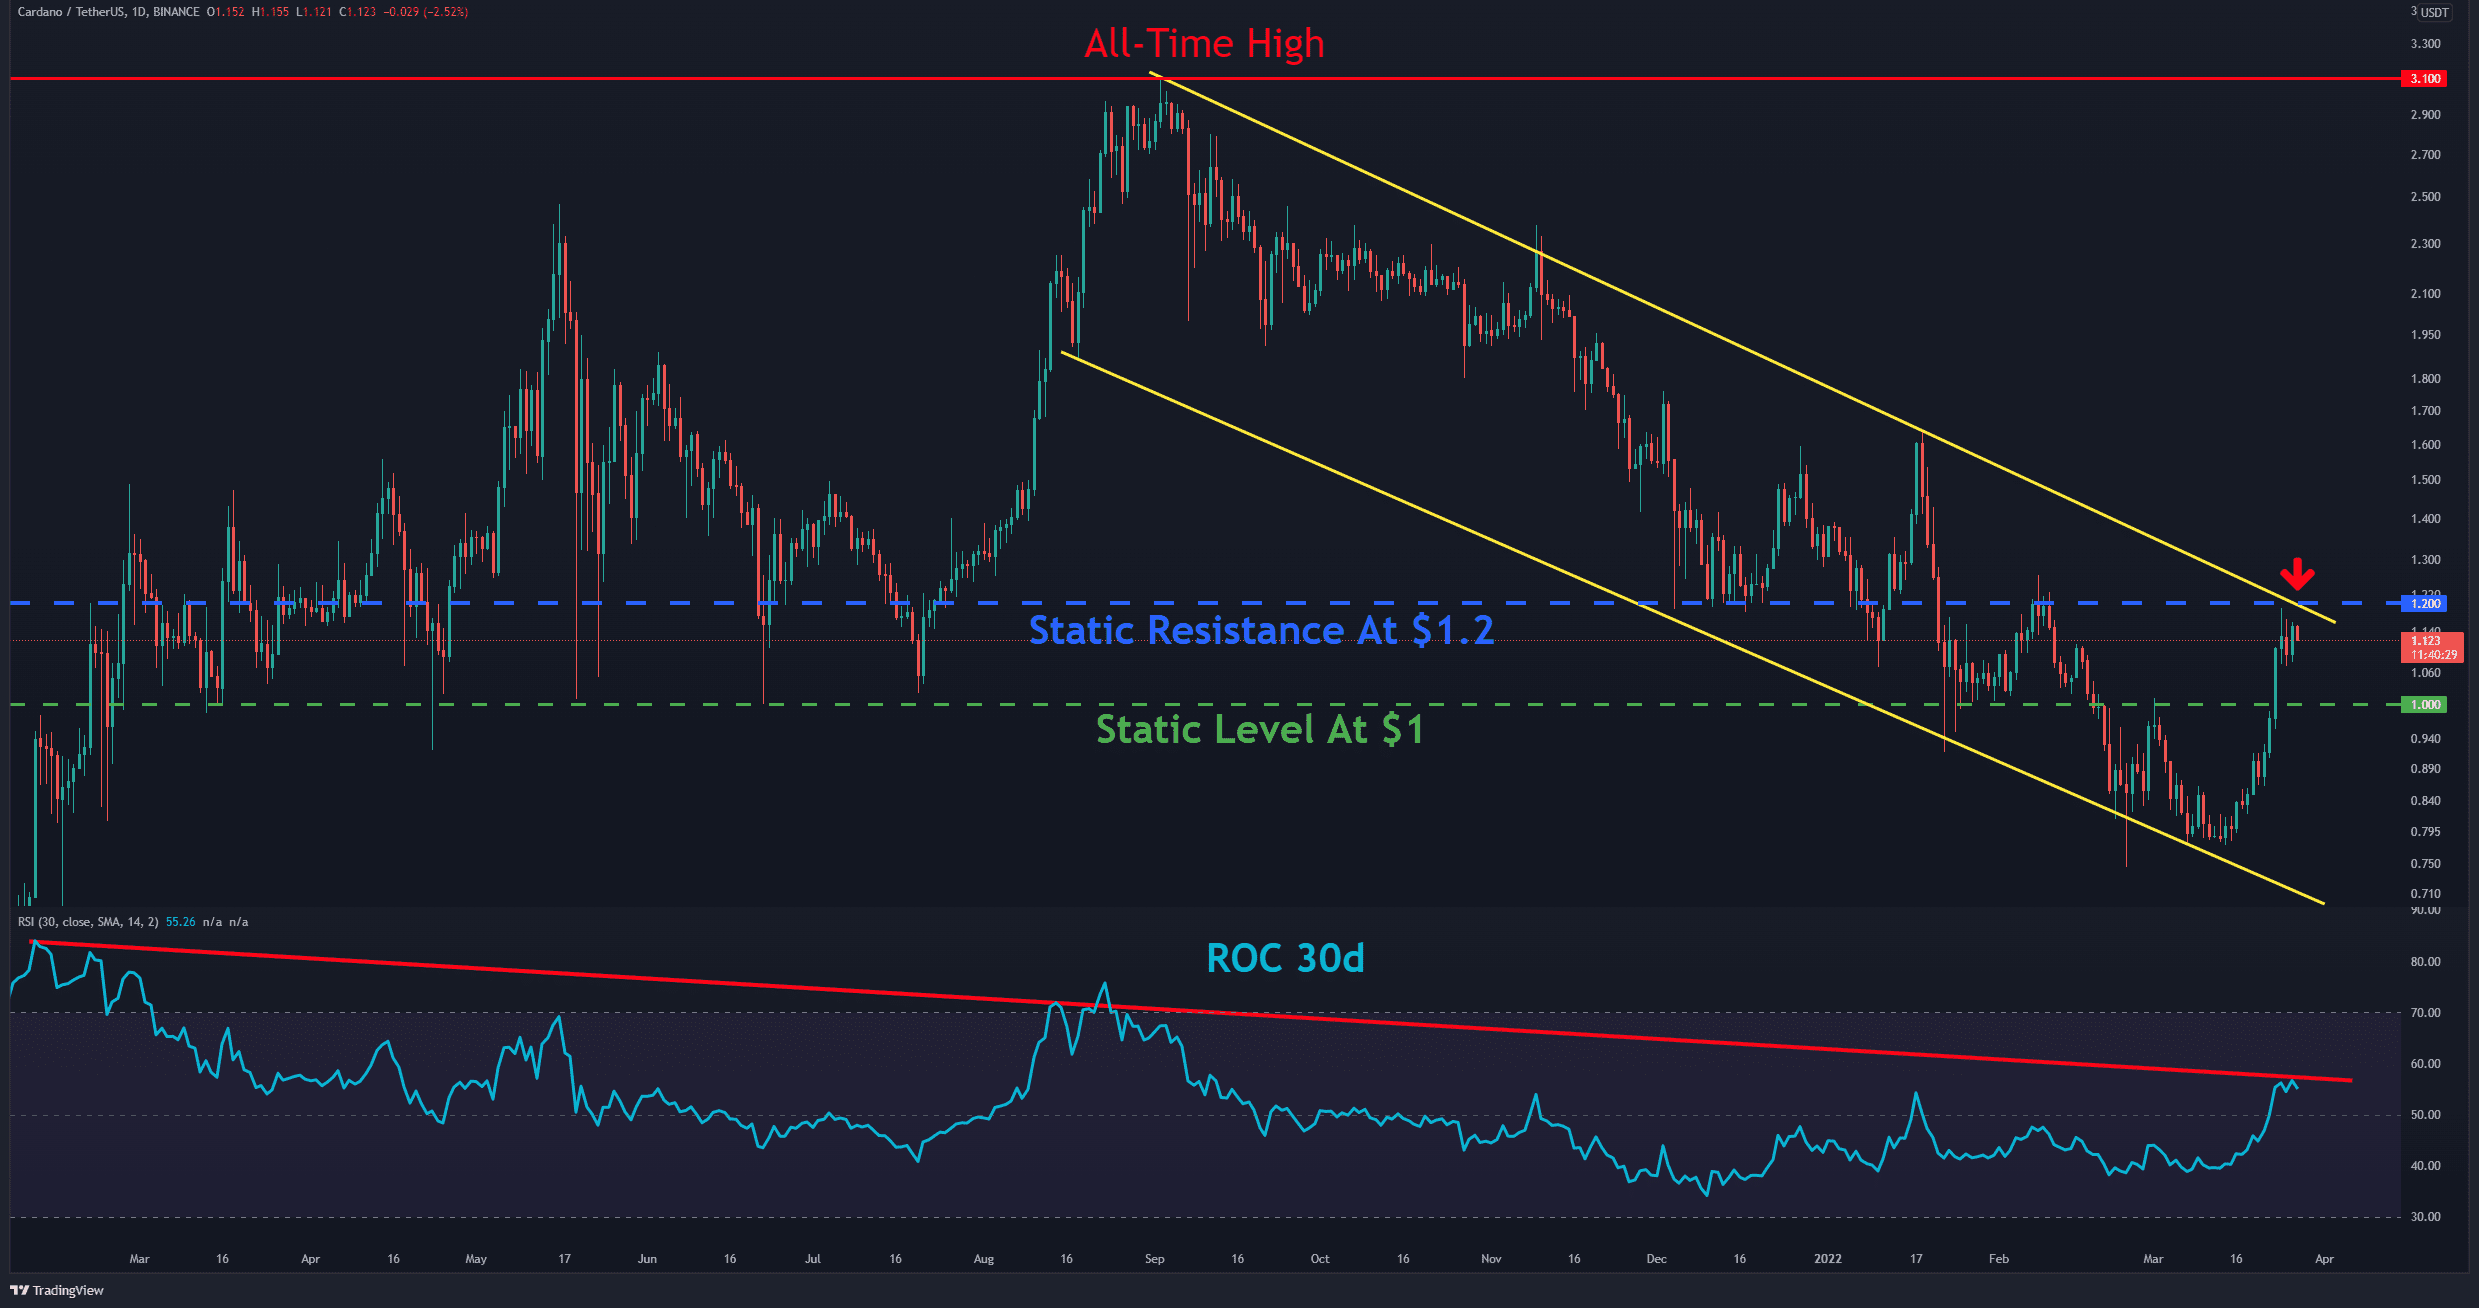 📊 Understanding the Cup and Handle Pattern for BINANCE:BTCUSDT by QuantVue  — TradingView